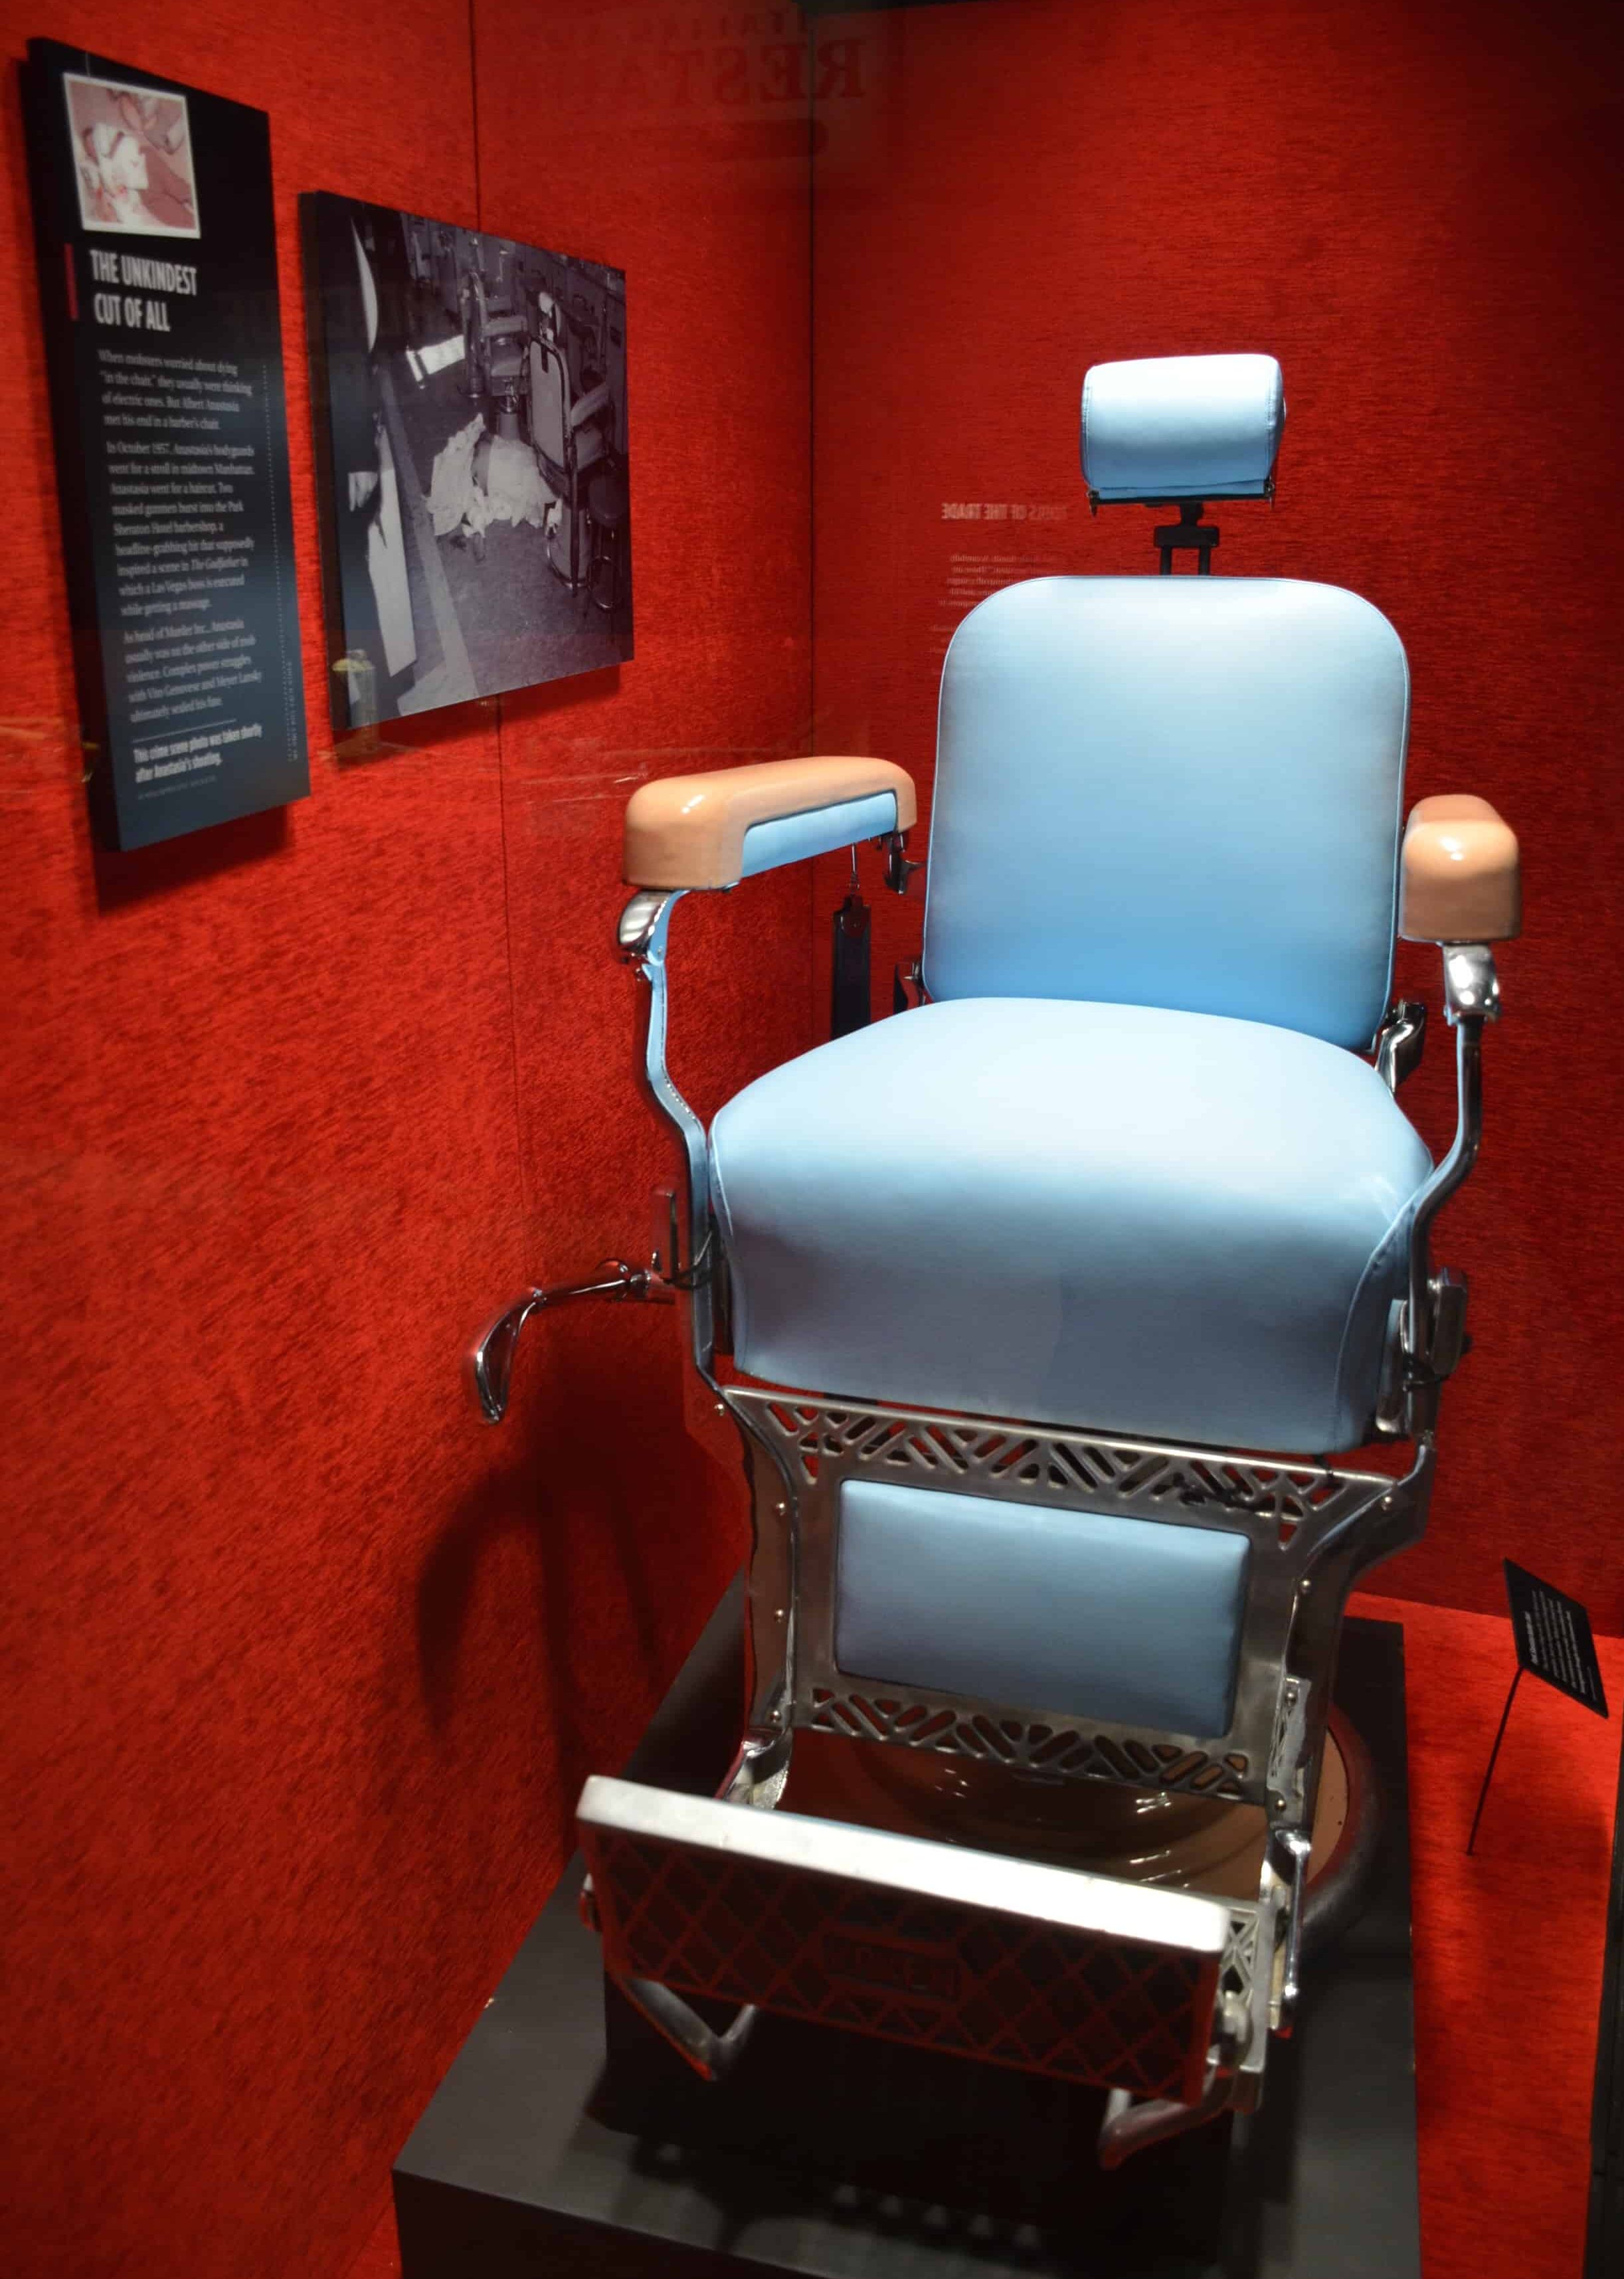 Barber chair where Albert Anastasia was murdered at the Mob Museum in Las Vegas, Nevada